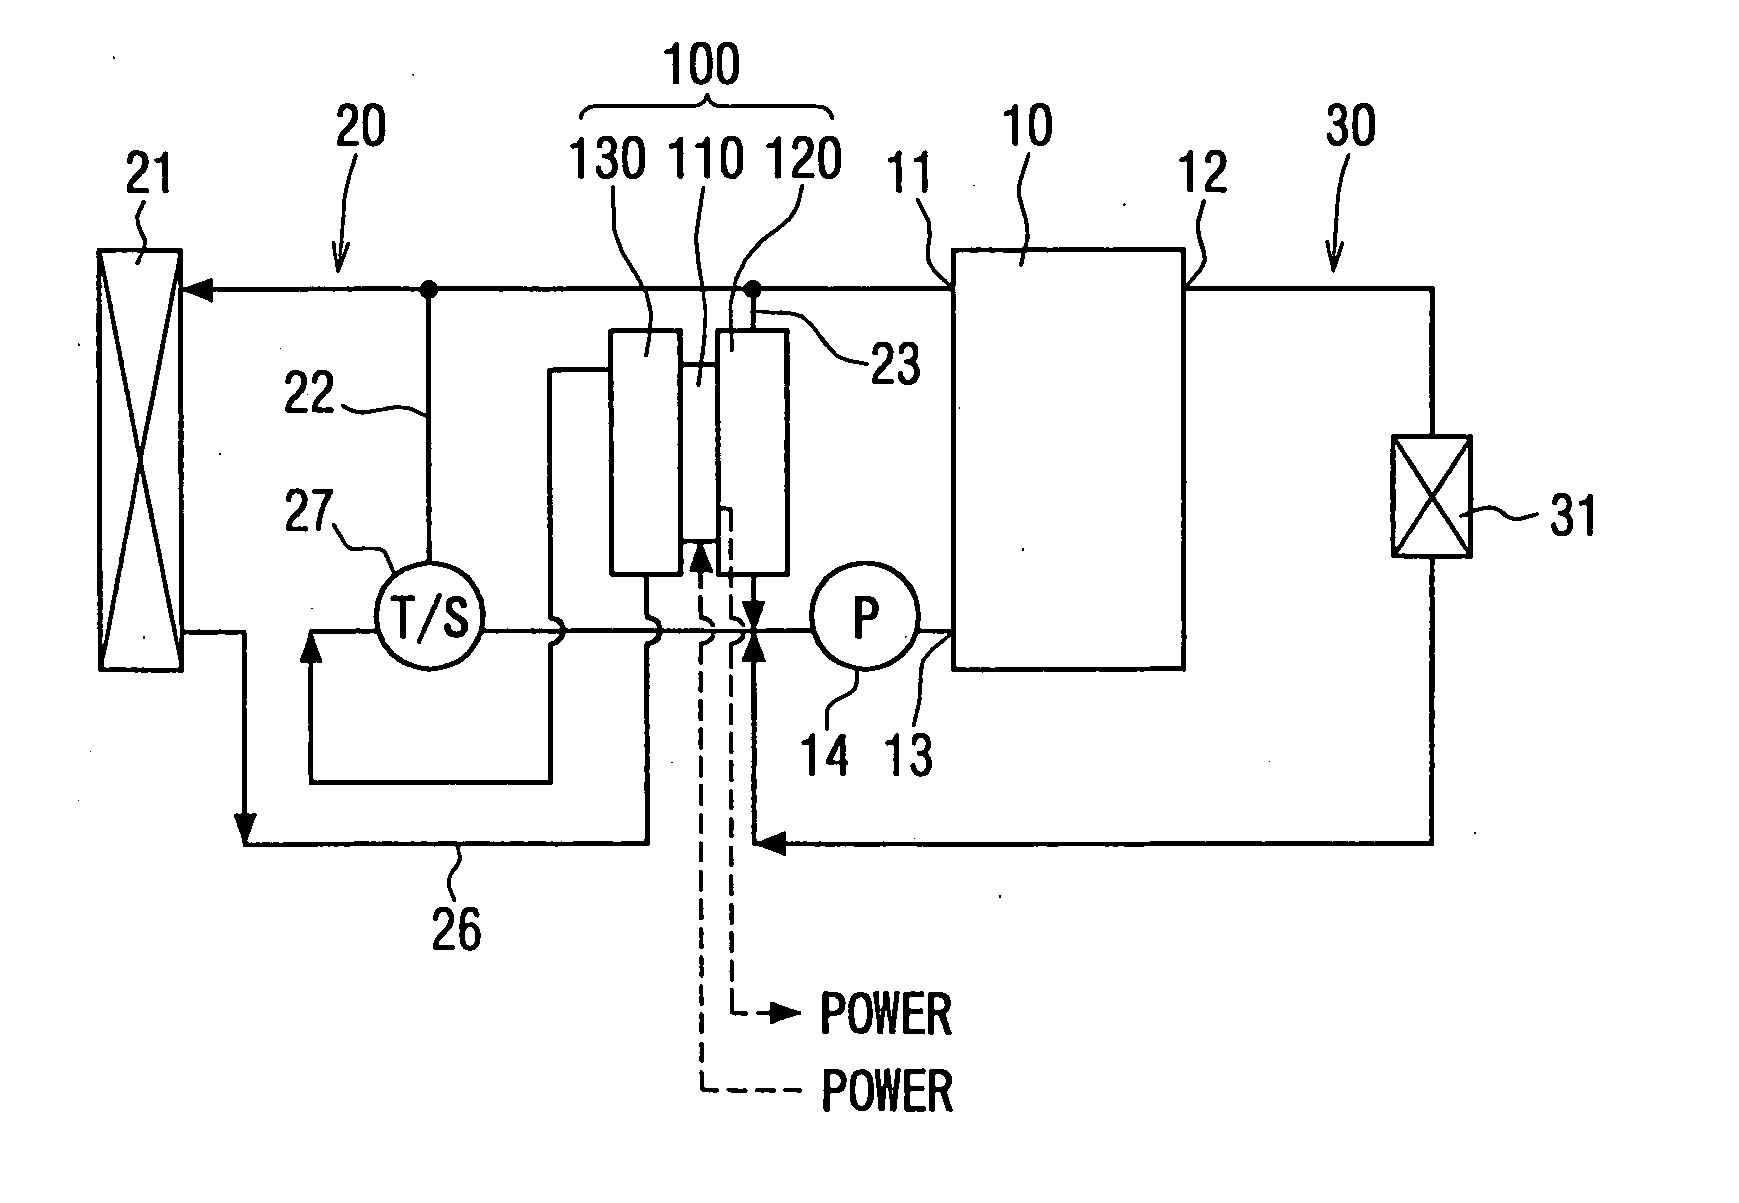 Thermoelectric power generation system